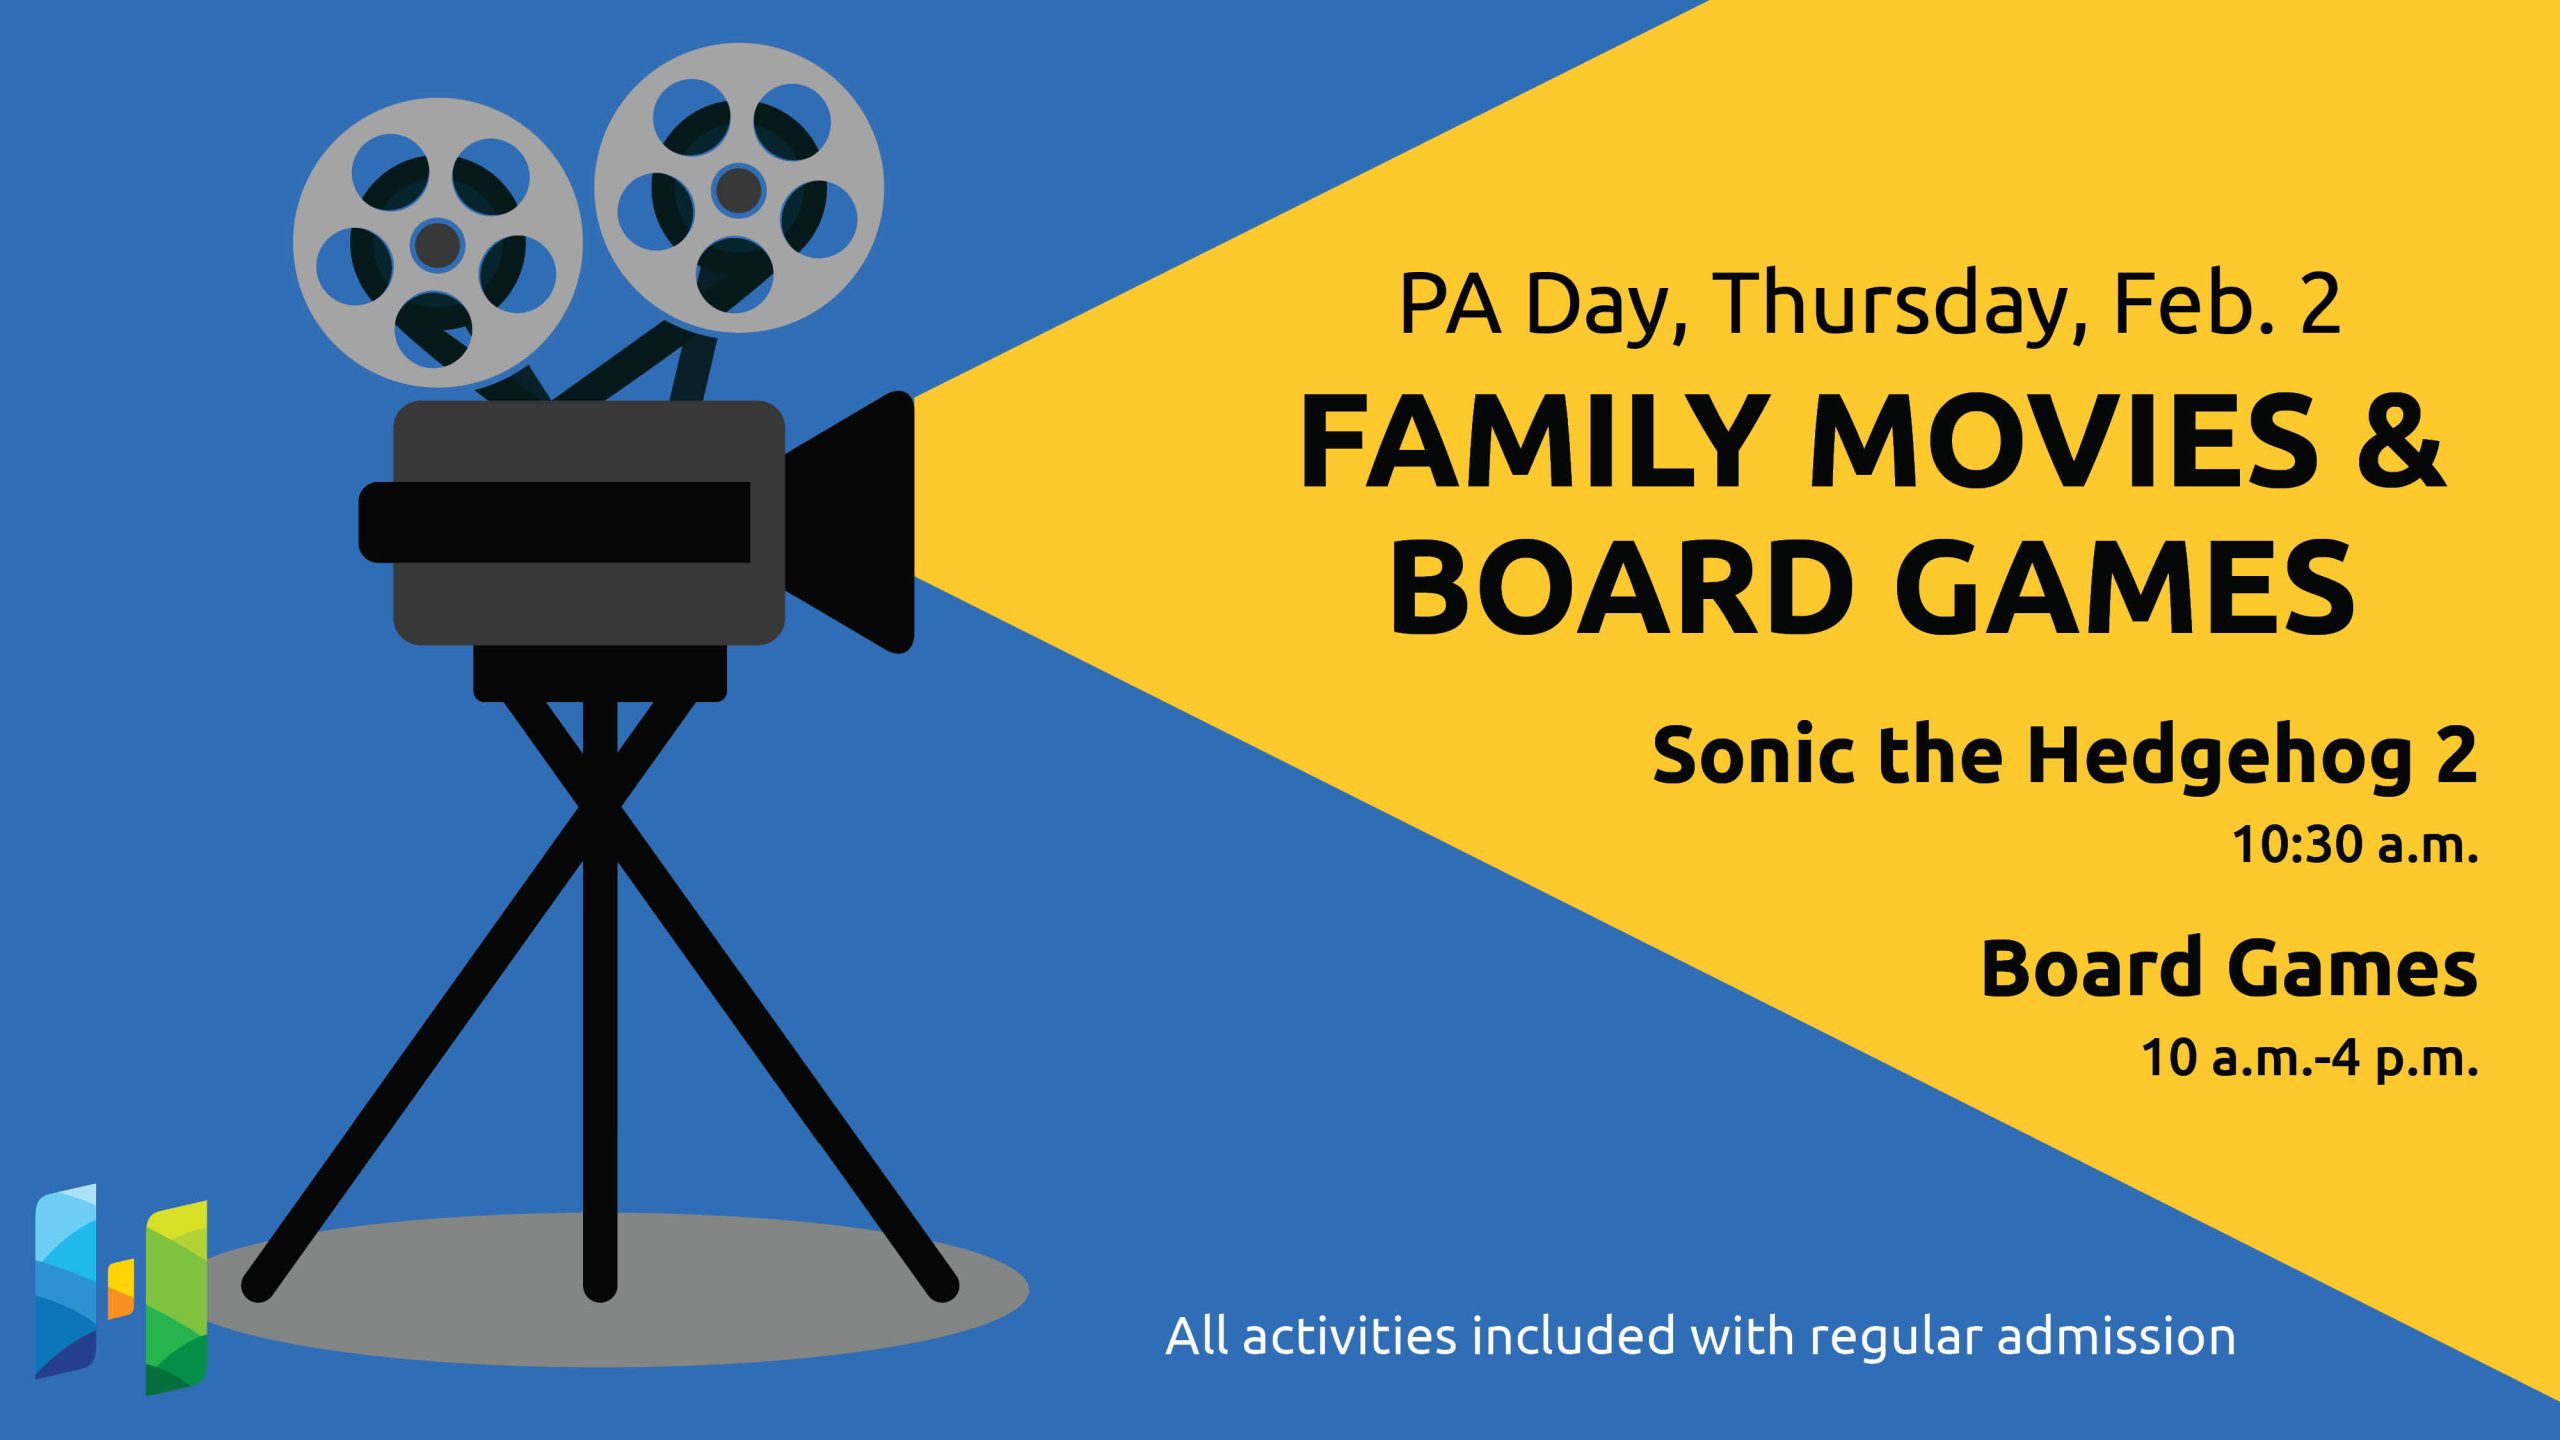 Illustration of a movie projector with text promoting PA Day family movie and board games